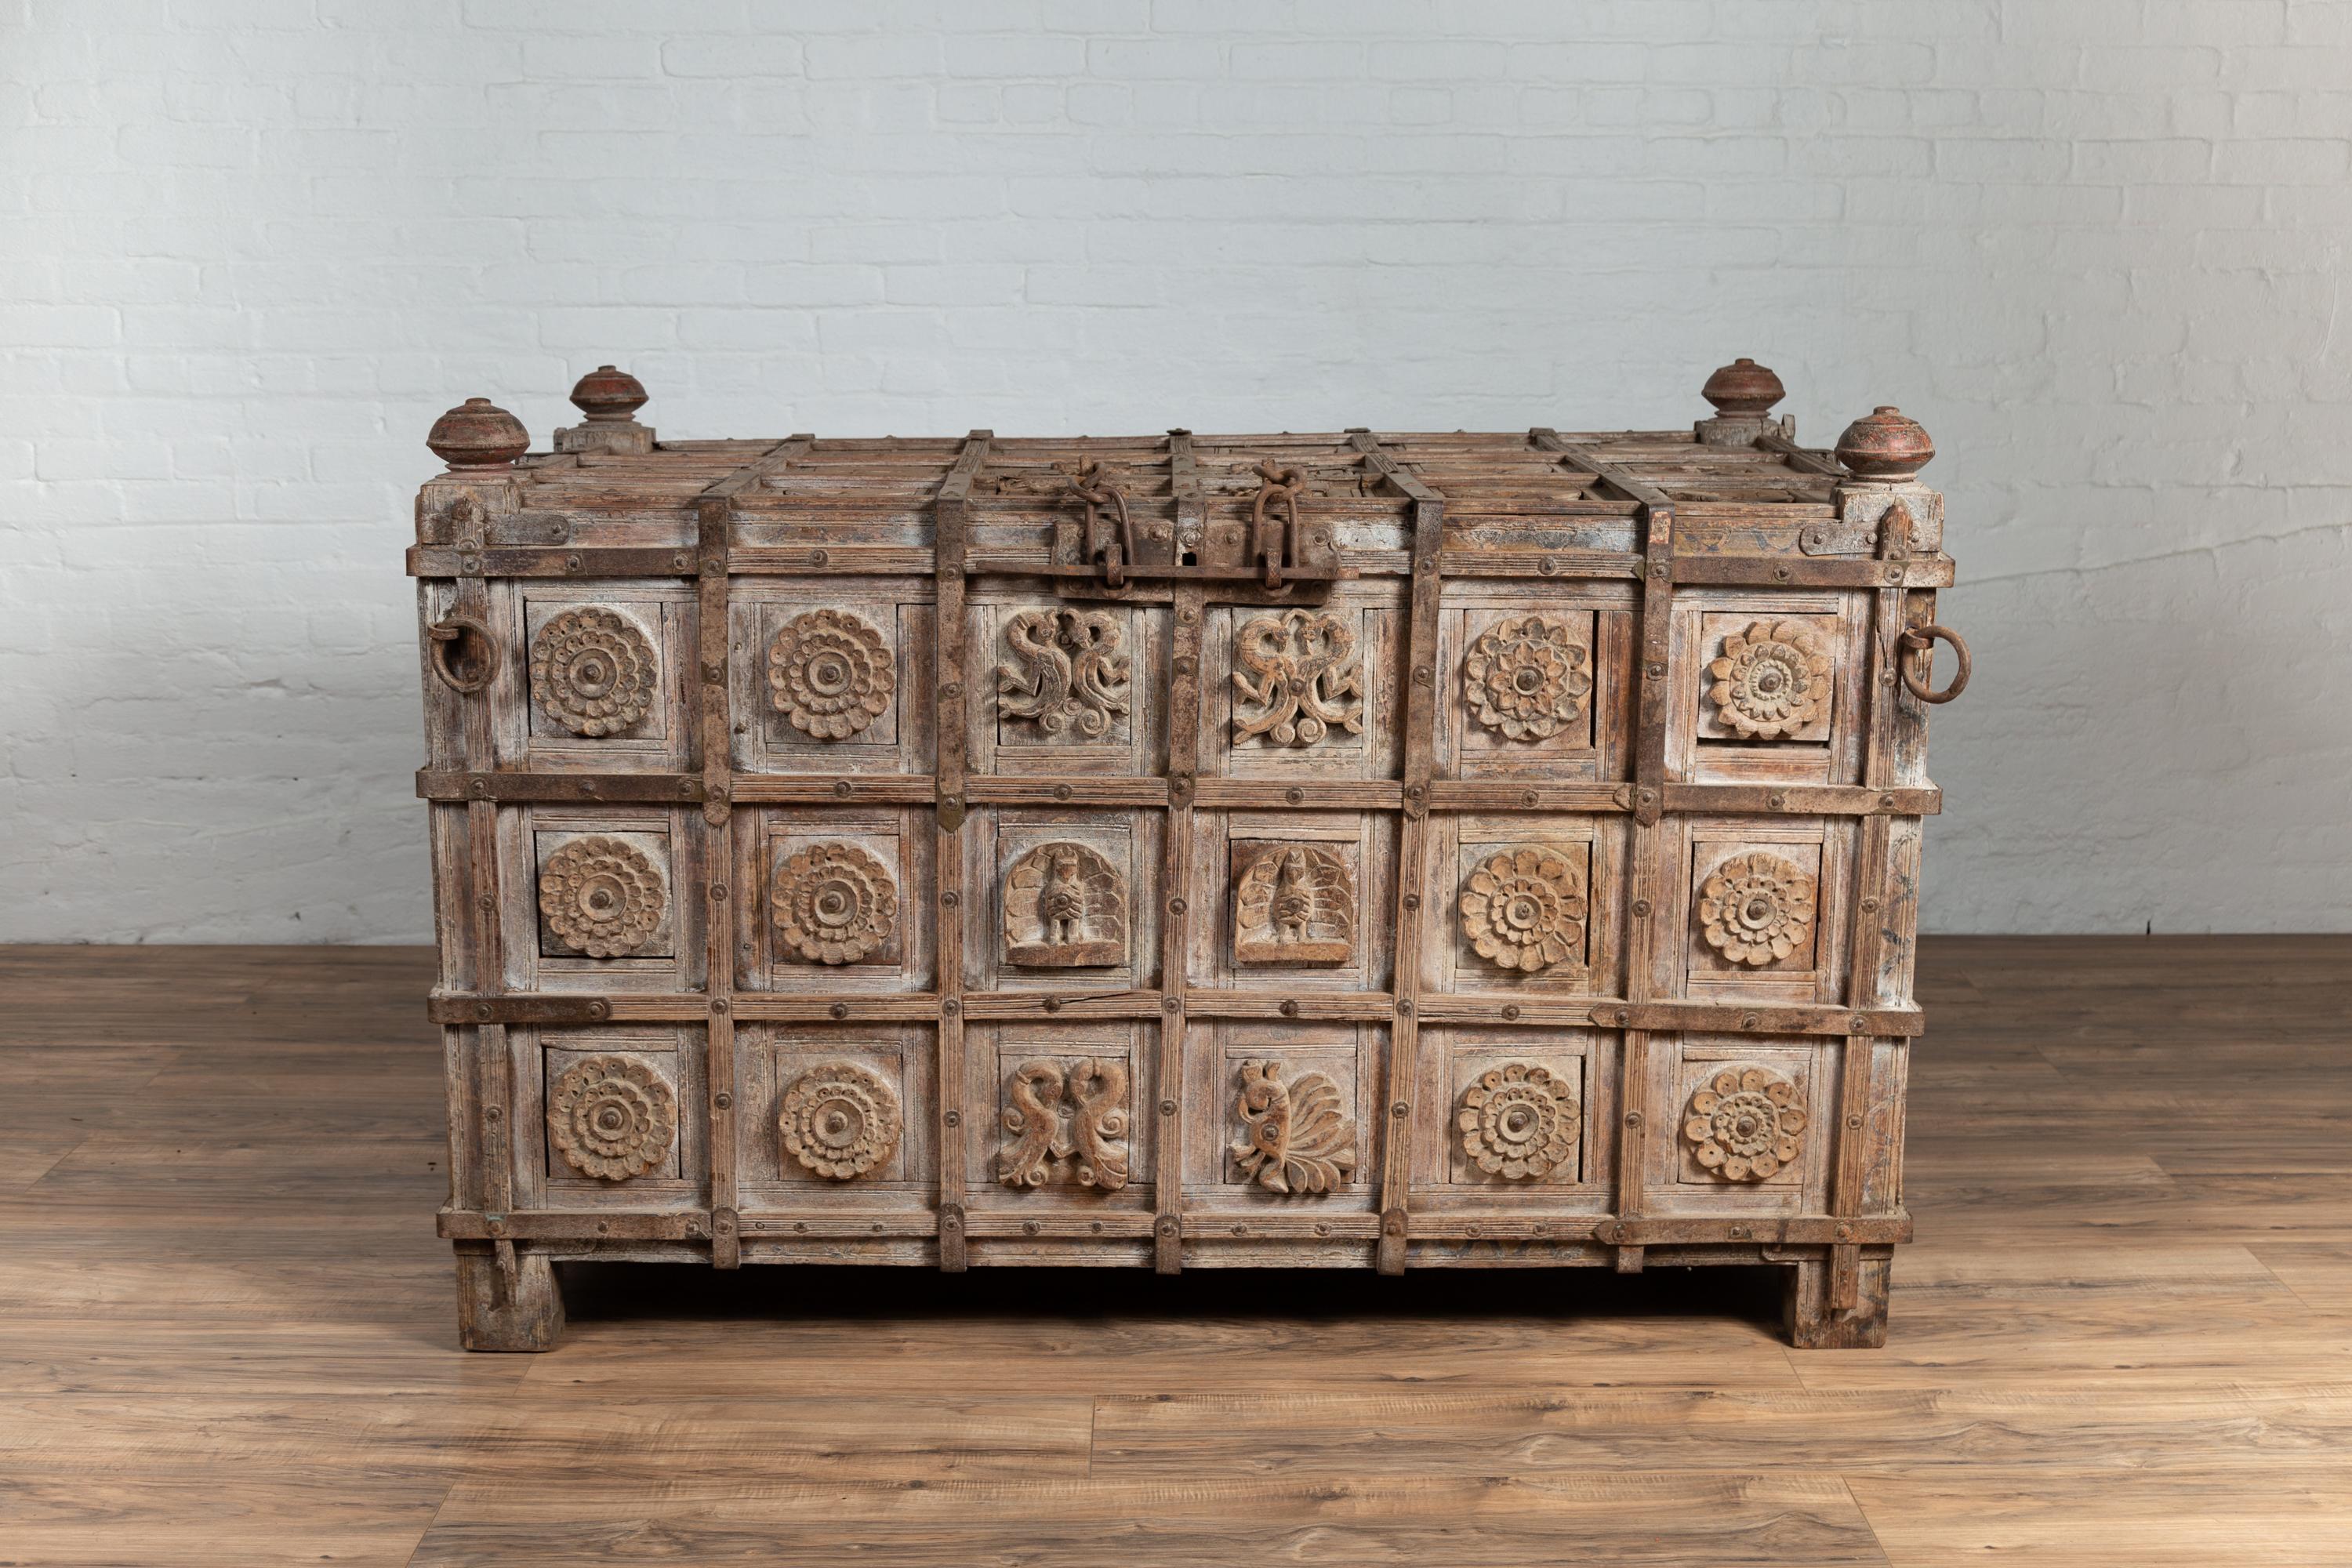 An oversized and unusual Indian treasure chest from the 19th century, with raised X pattern design, carved rosettes and intertwining animals. It is hard not to be stricken by the amazing presence of this wooden treasure chest boasting great